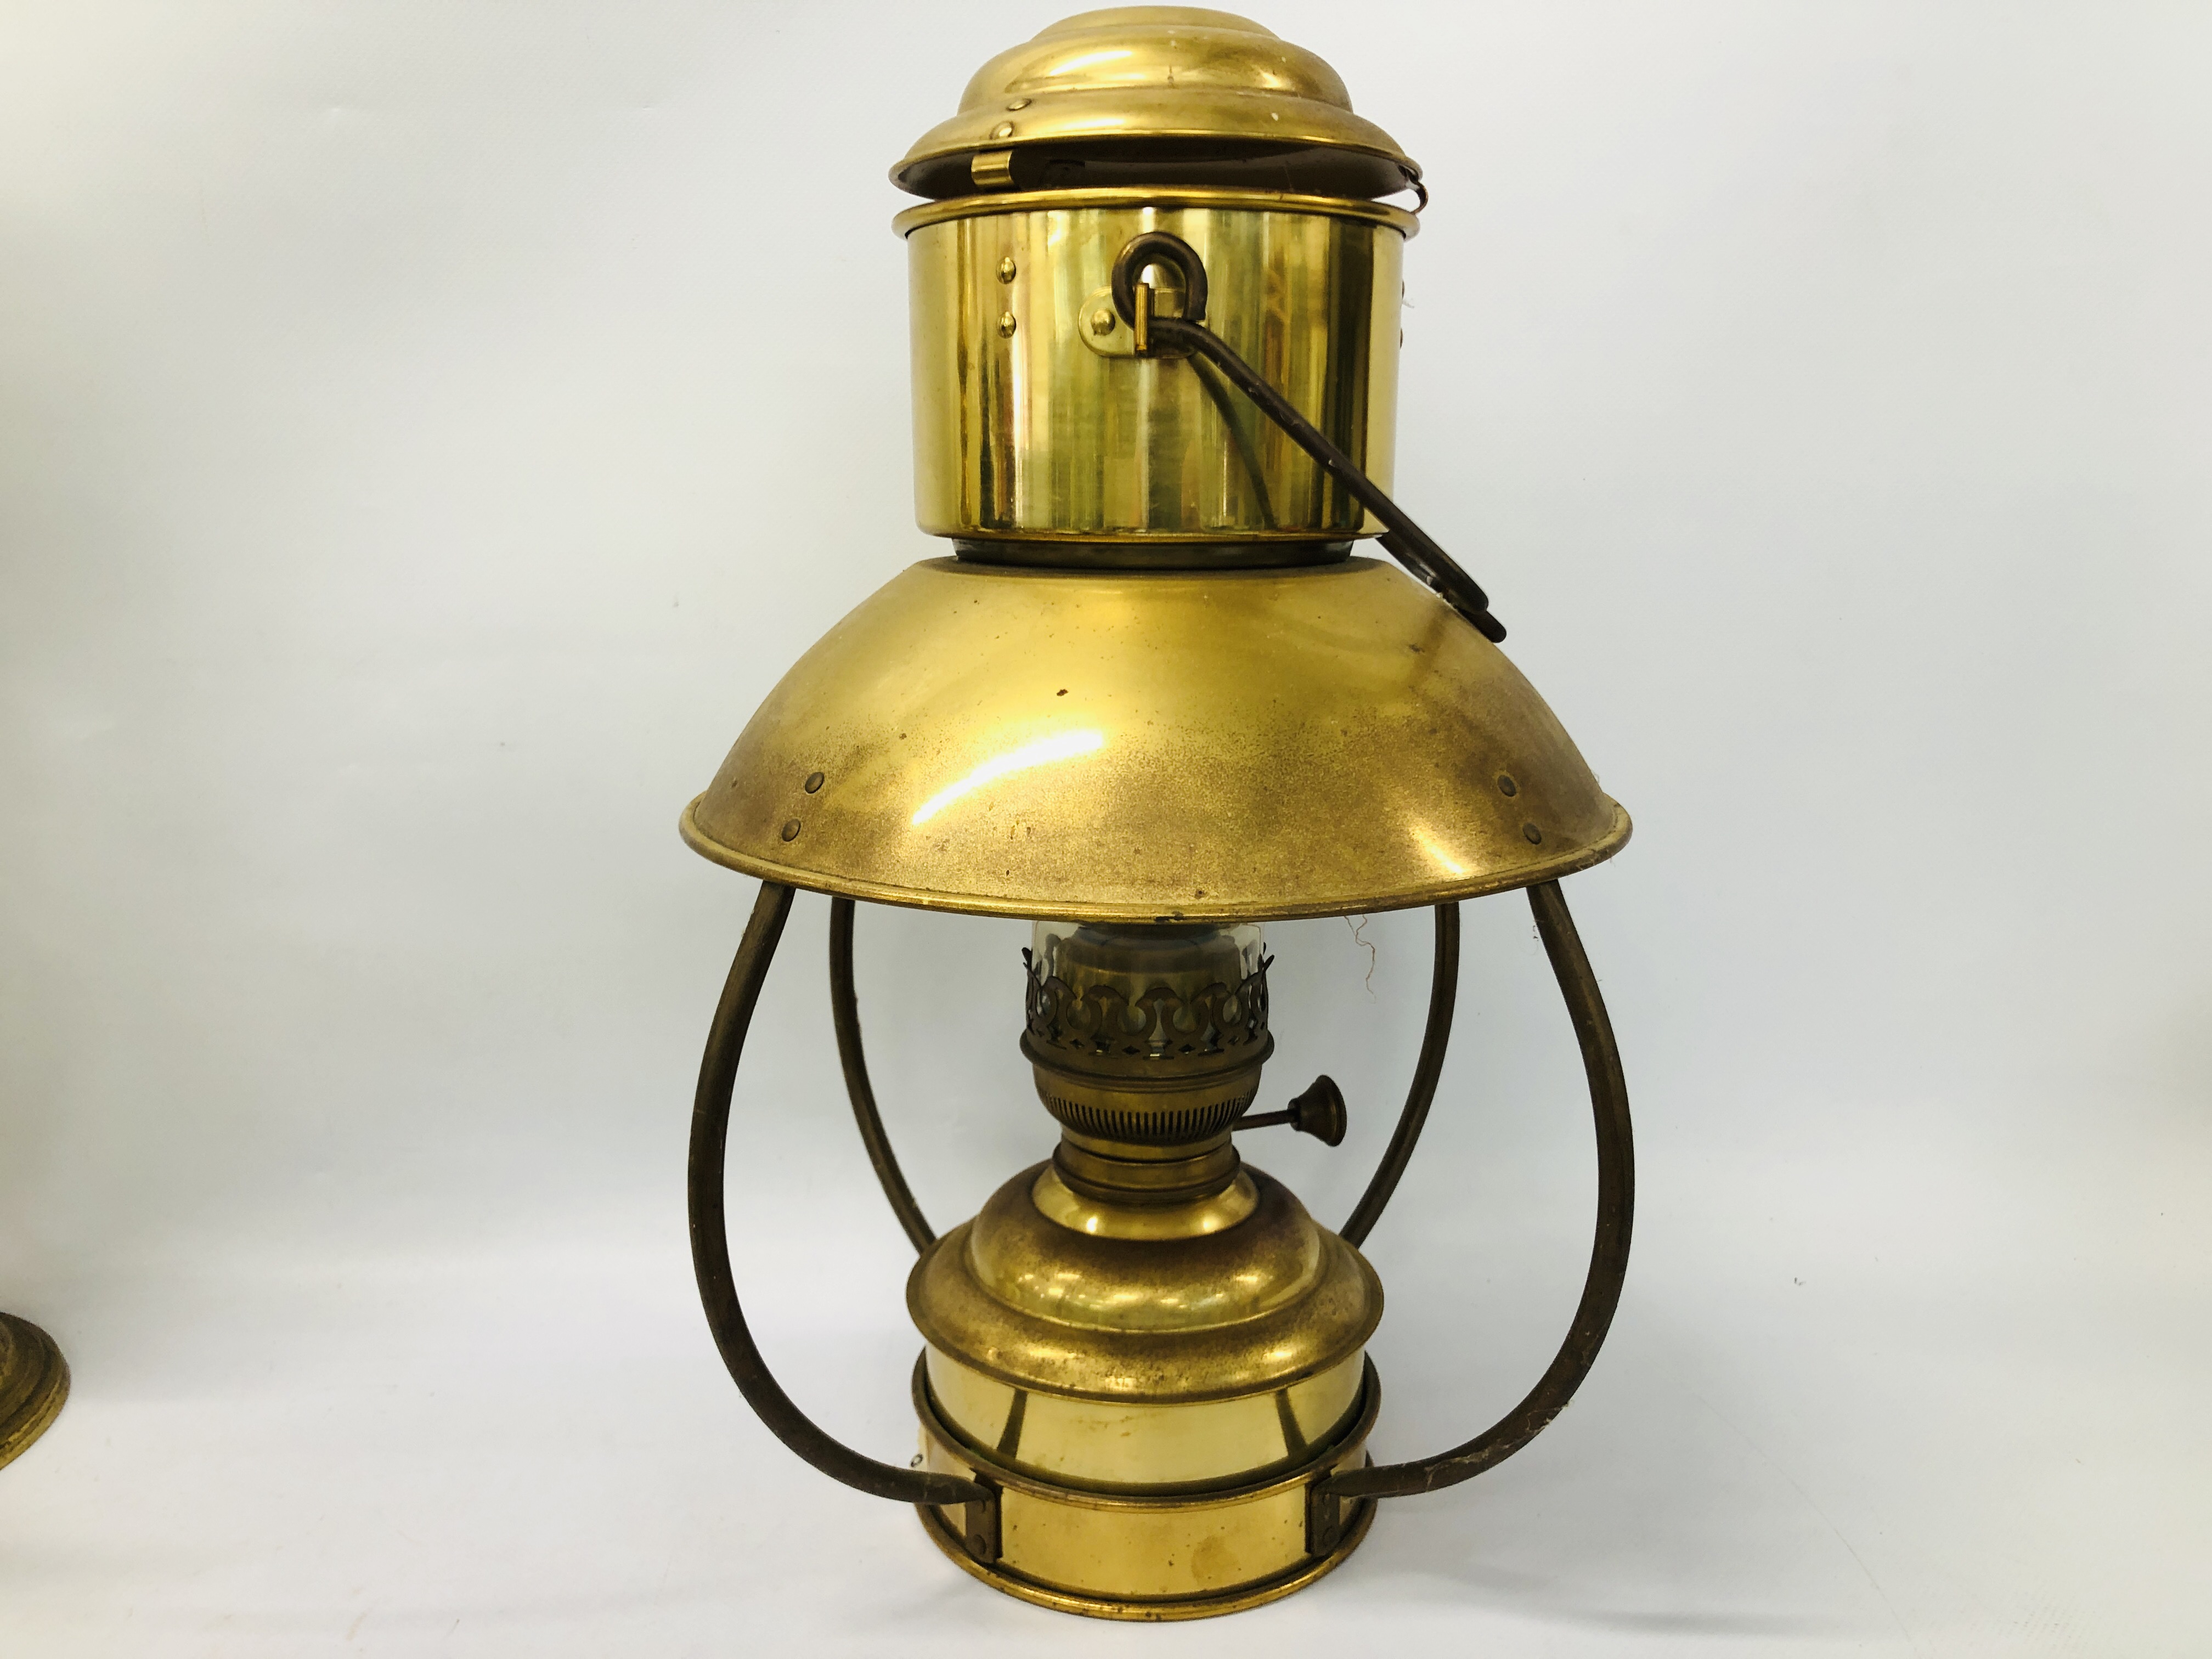 MIXED BRASS AND COPPER TO INCLUDE OIL LAMPS, LAMPS, STOVE, TRIVET, WATERING CAN, SCALES, CUPS, - Image 10 of 27